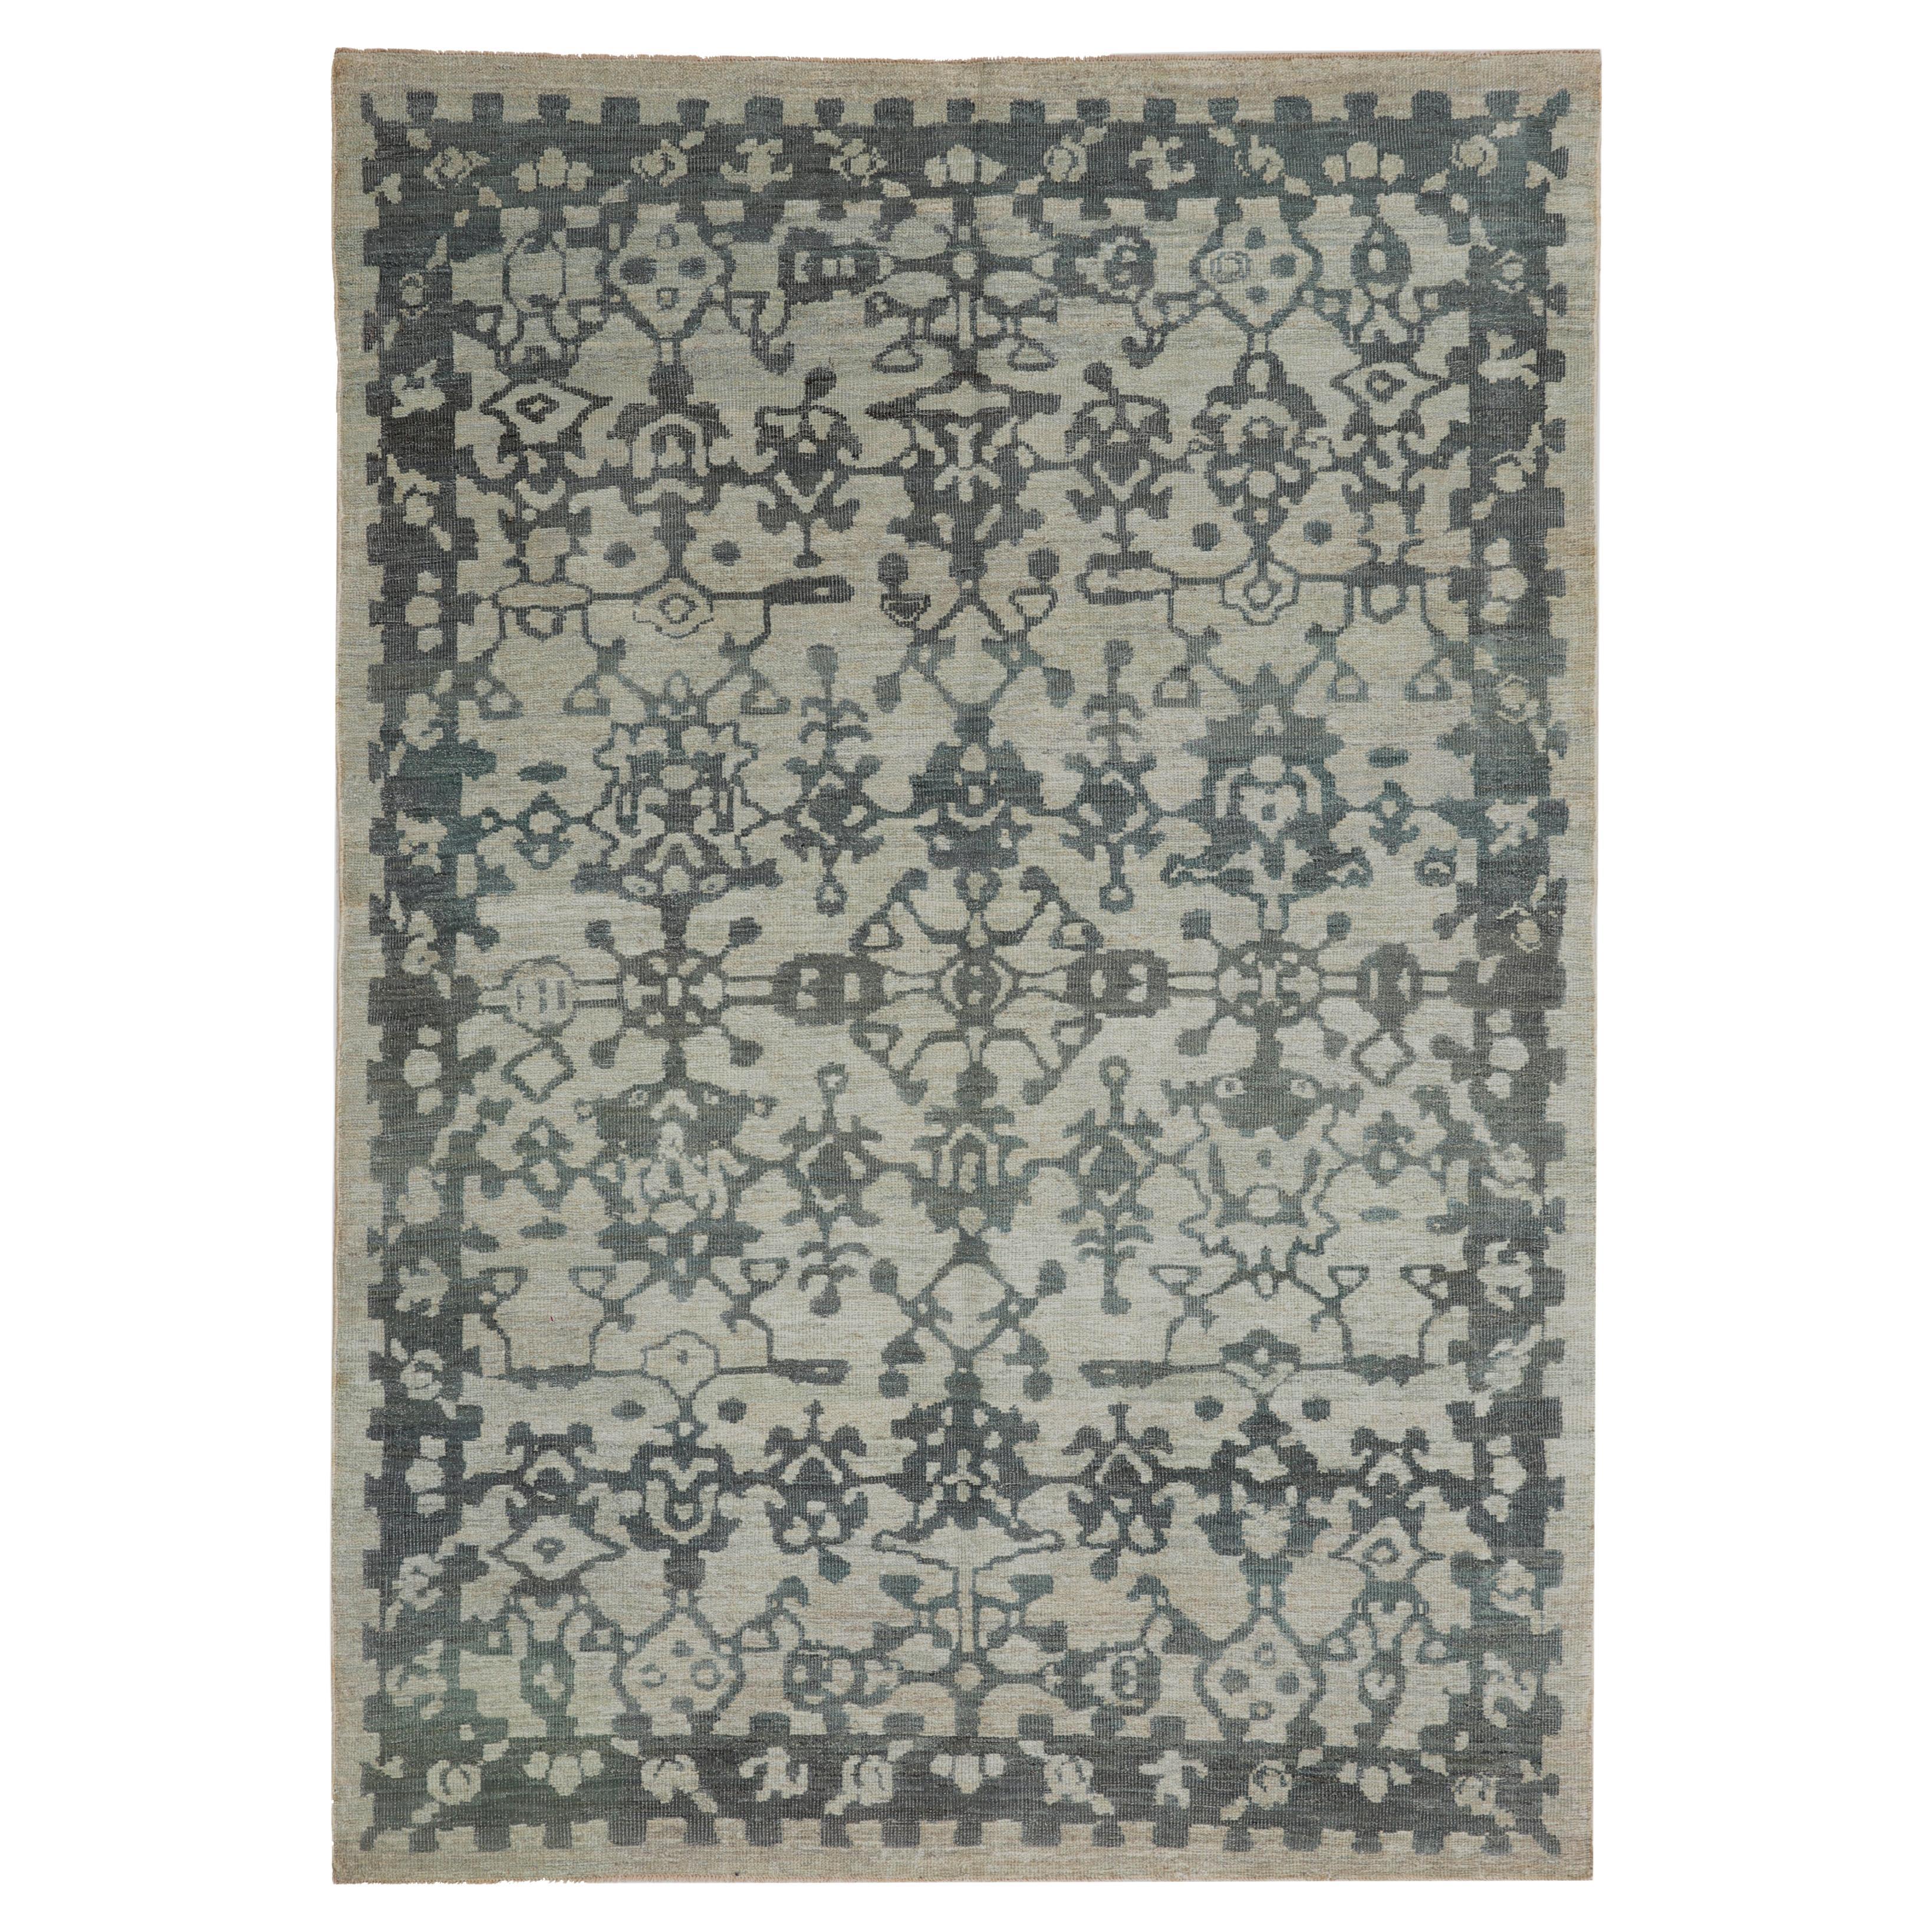 Luxurious Handmade Sultanabad Rug - Transitional Design, Blue Tones - 5'10'' x 8 For Sale